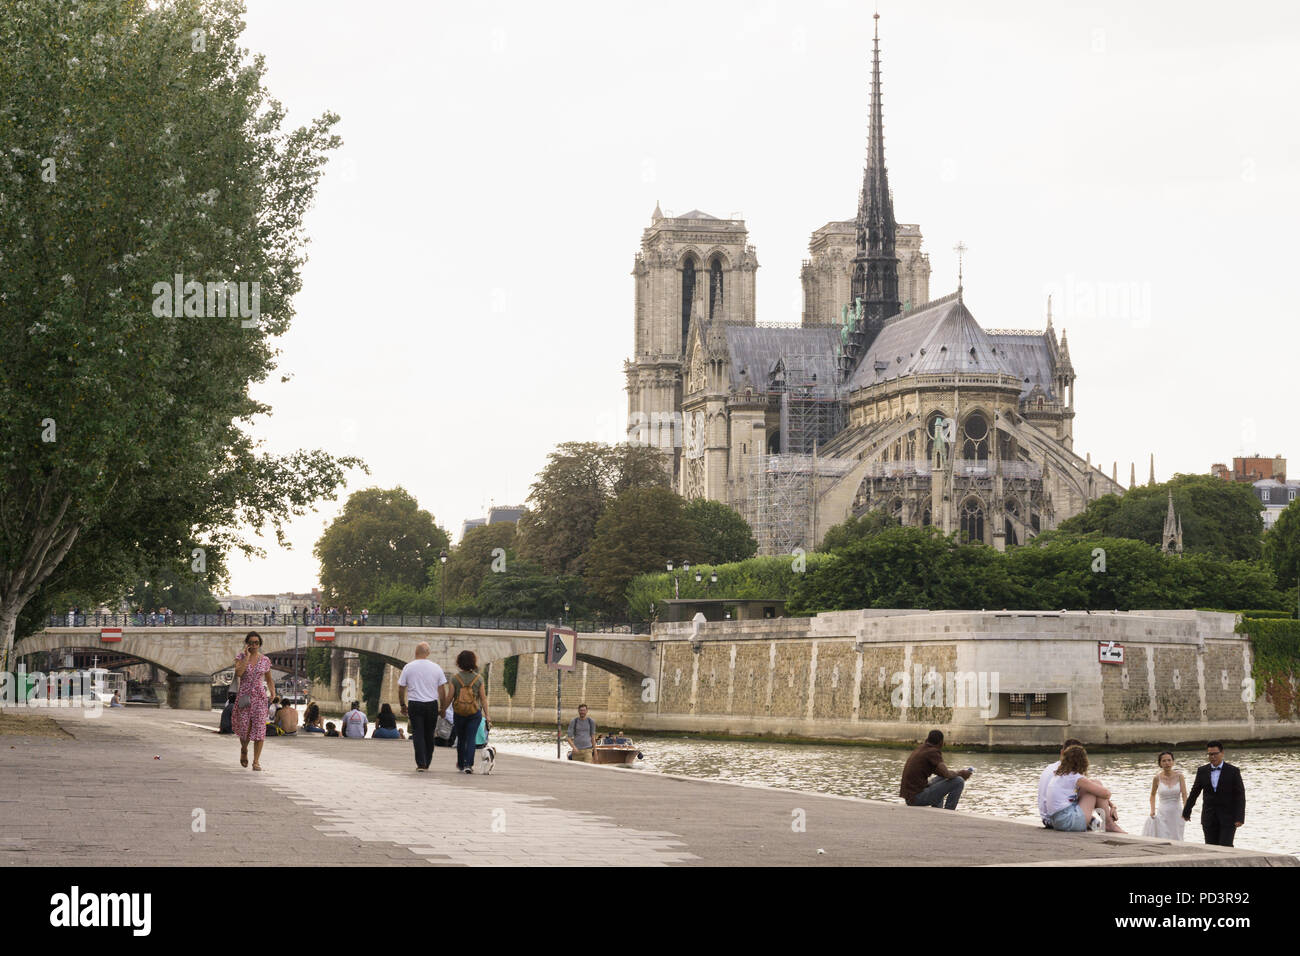 Paris Notre Dame - people walking along the Seine left embankment, the Notre Dame cathedral in the background. Stock Photo